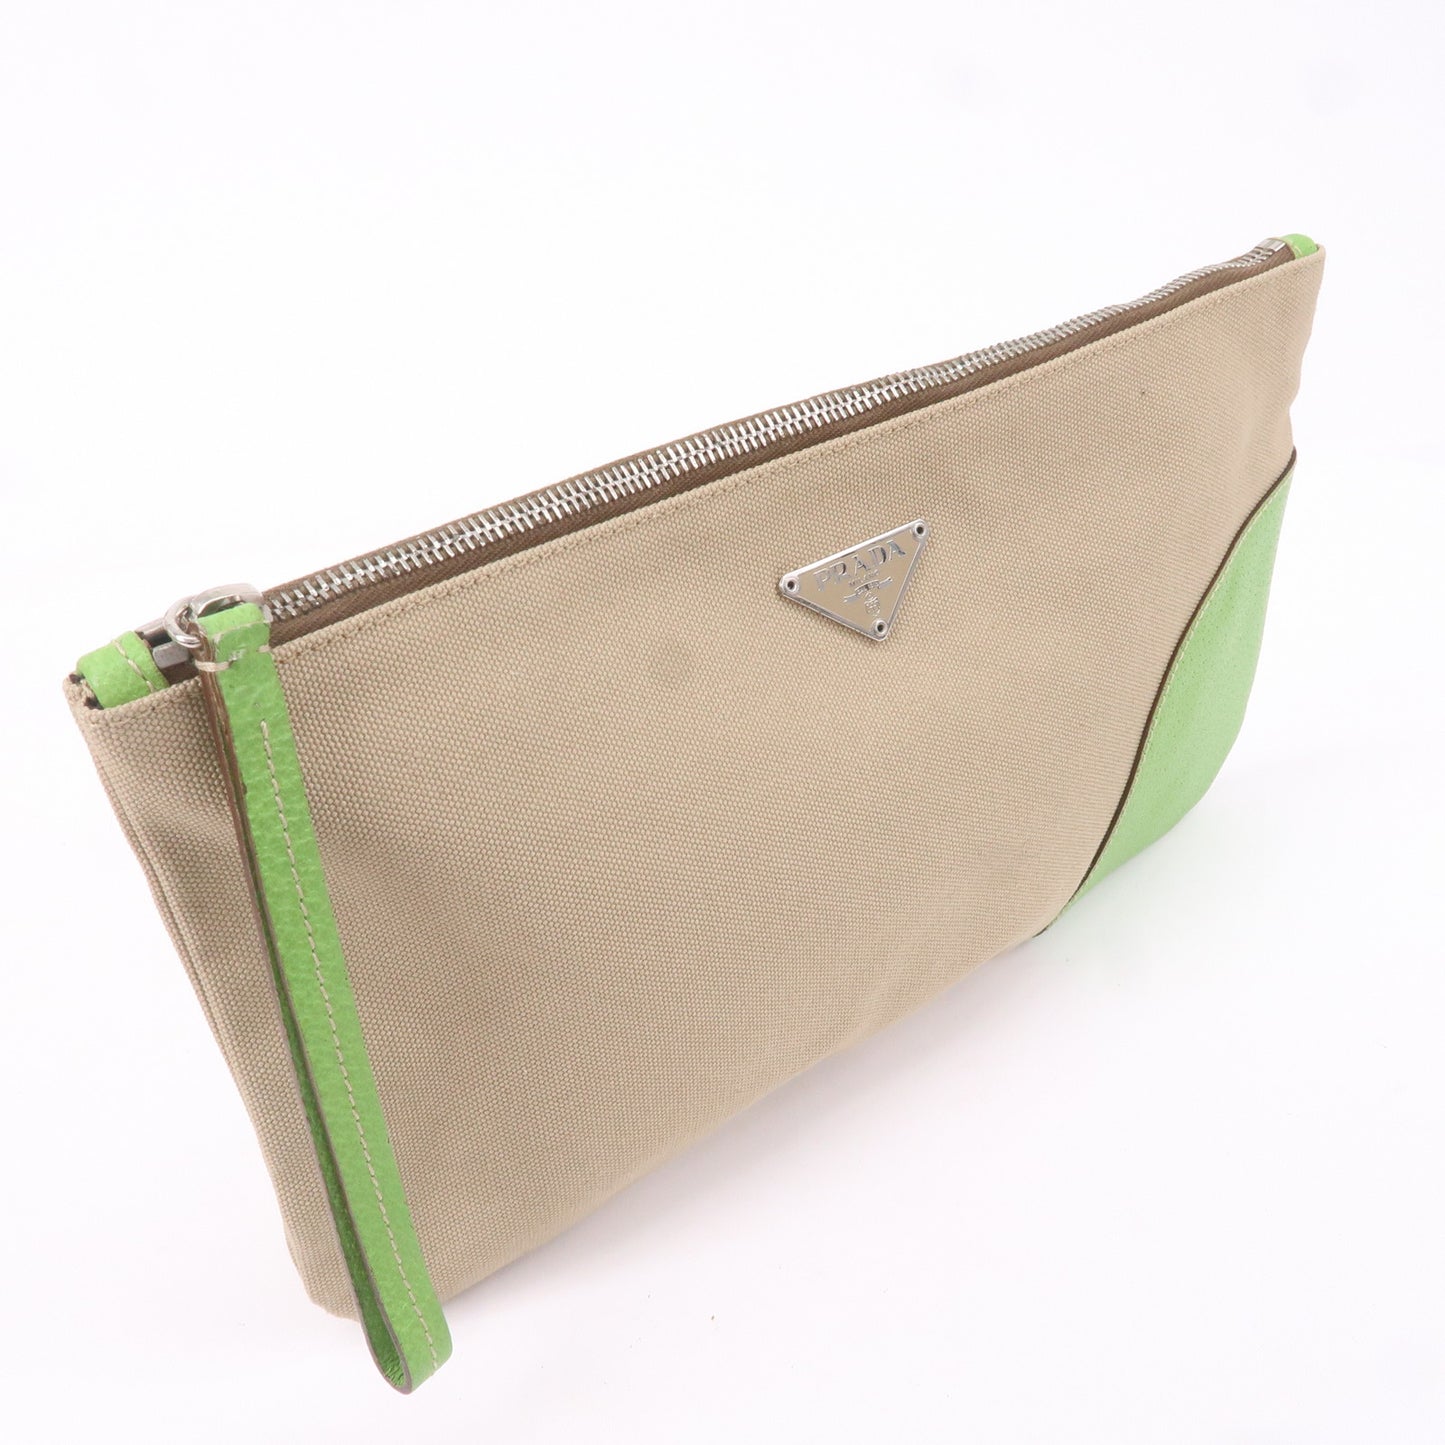 PARDA-Canvas-Leather-Pouch-Clutch-Bag-Beige-Green-VA0011 – dct